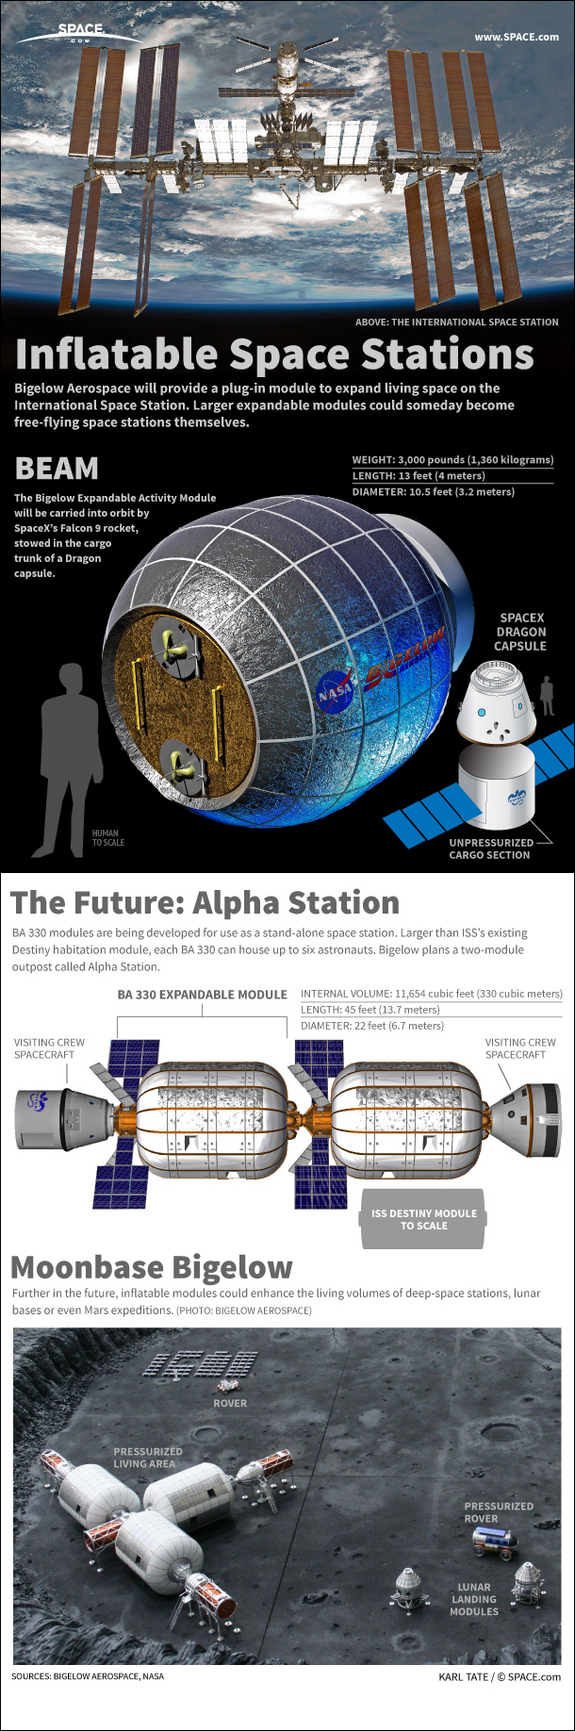 Find out how Bigelow Aerospace's BEAM expandable module will enhance the living area of the International Space Station, in this SPACE.com infographic.